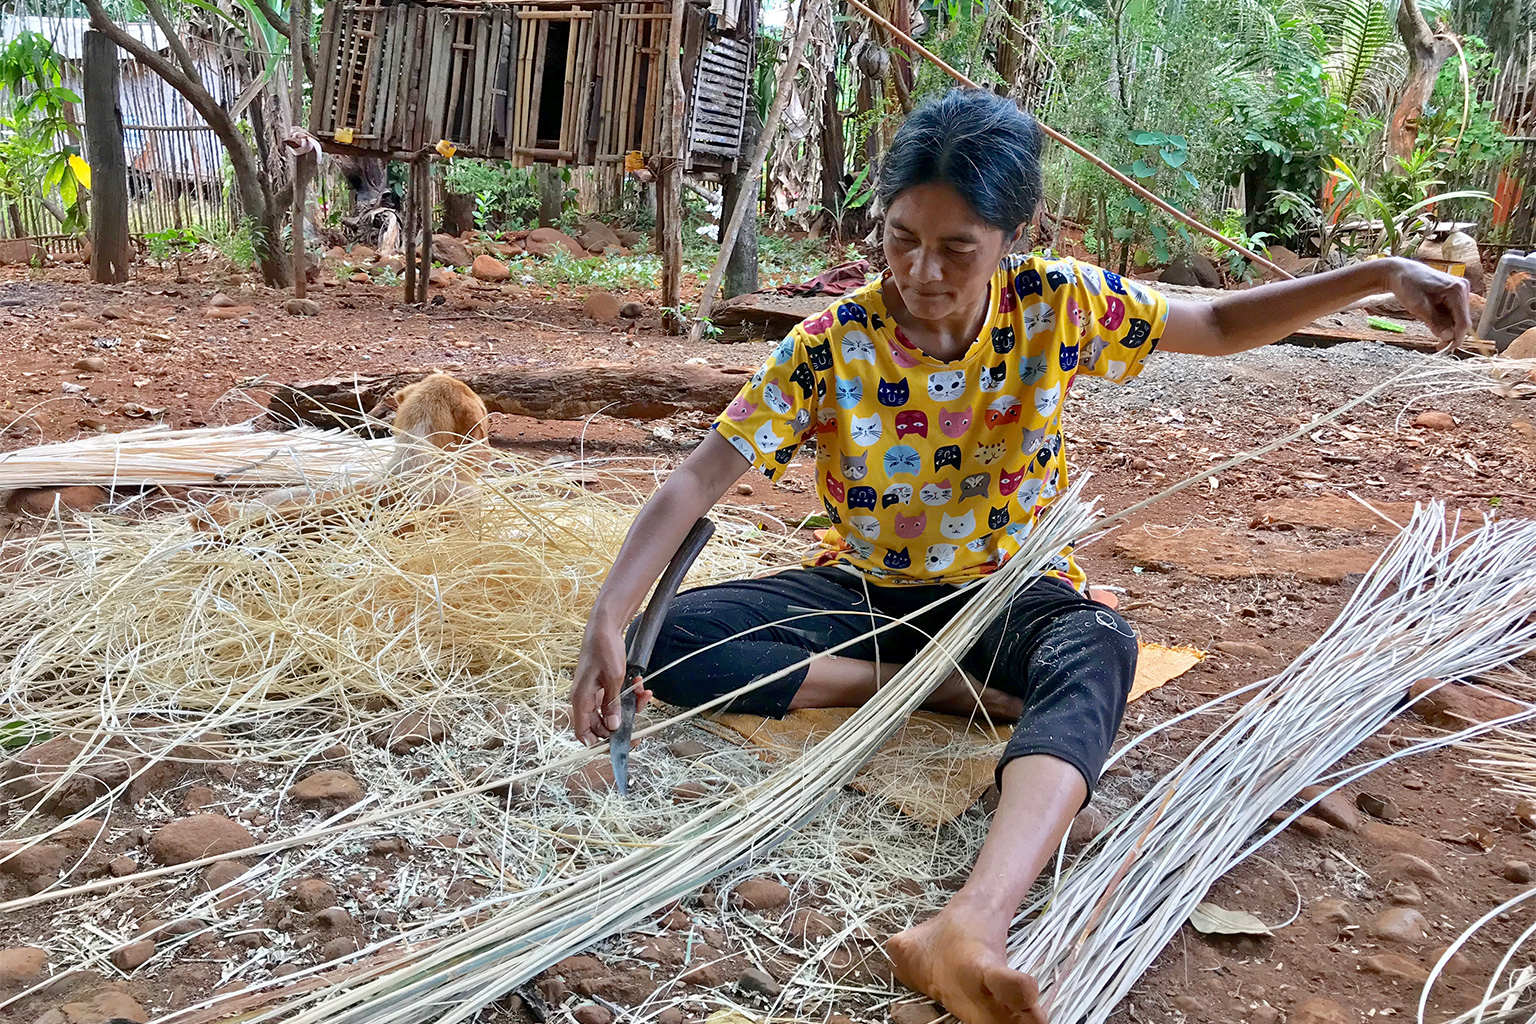 A woman thinning rattan strips in the shade of a tree.